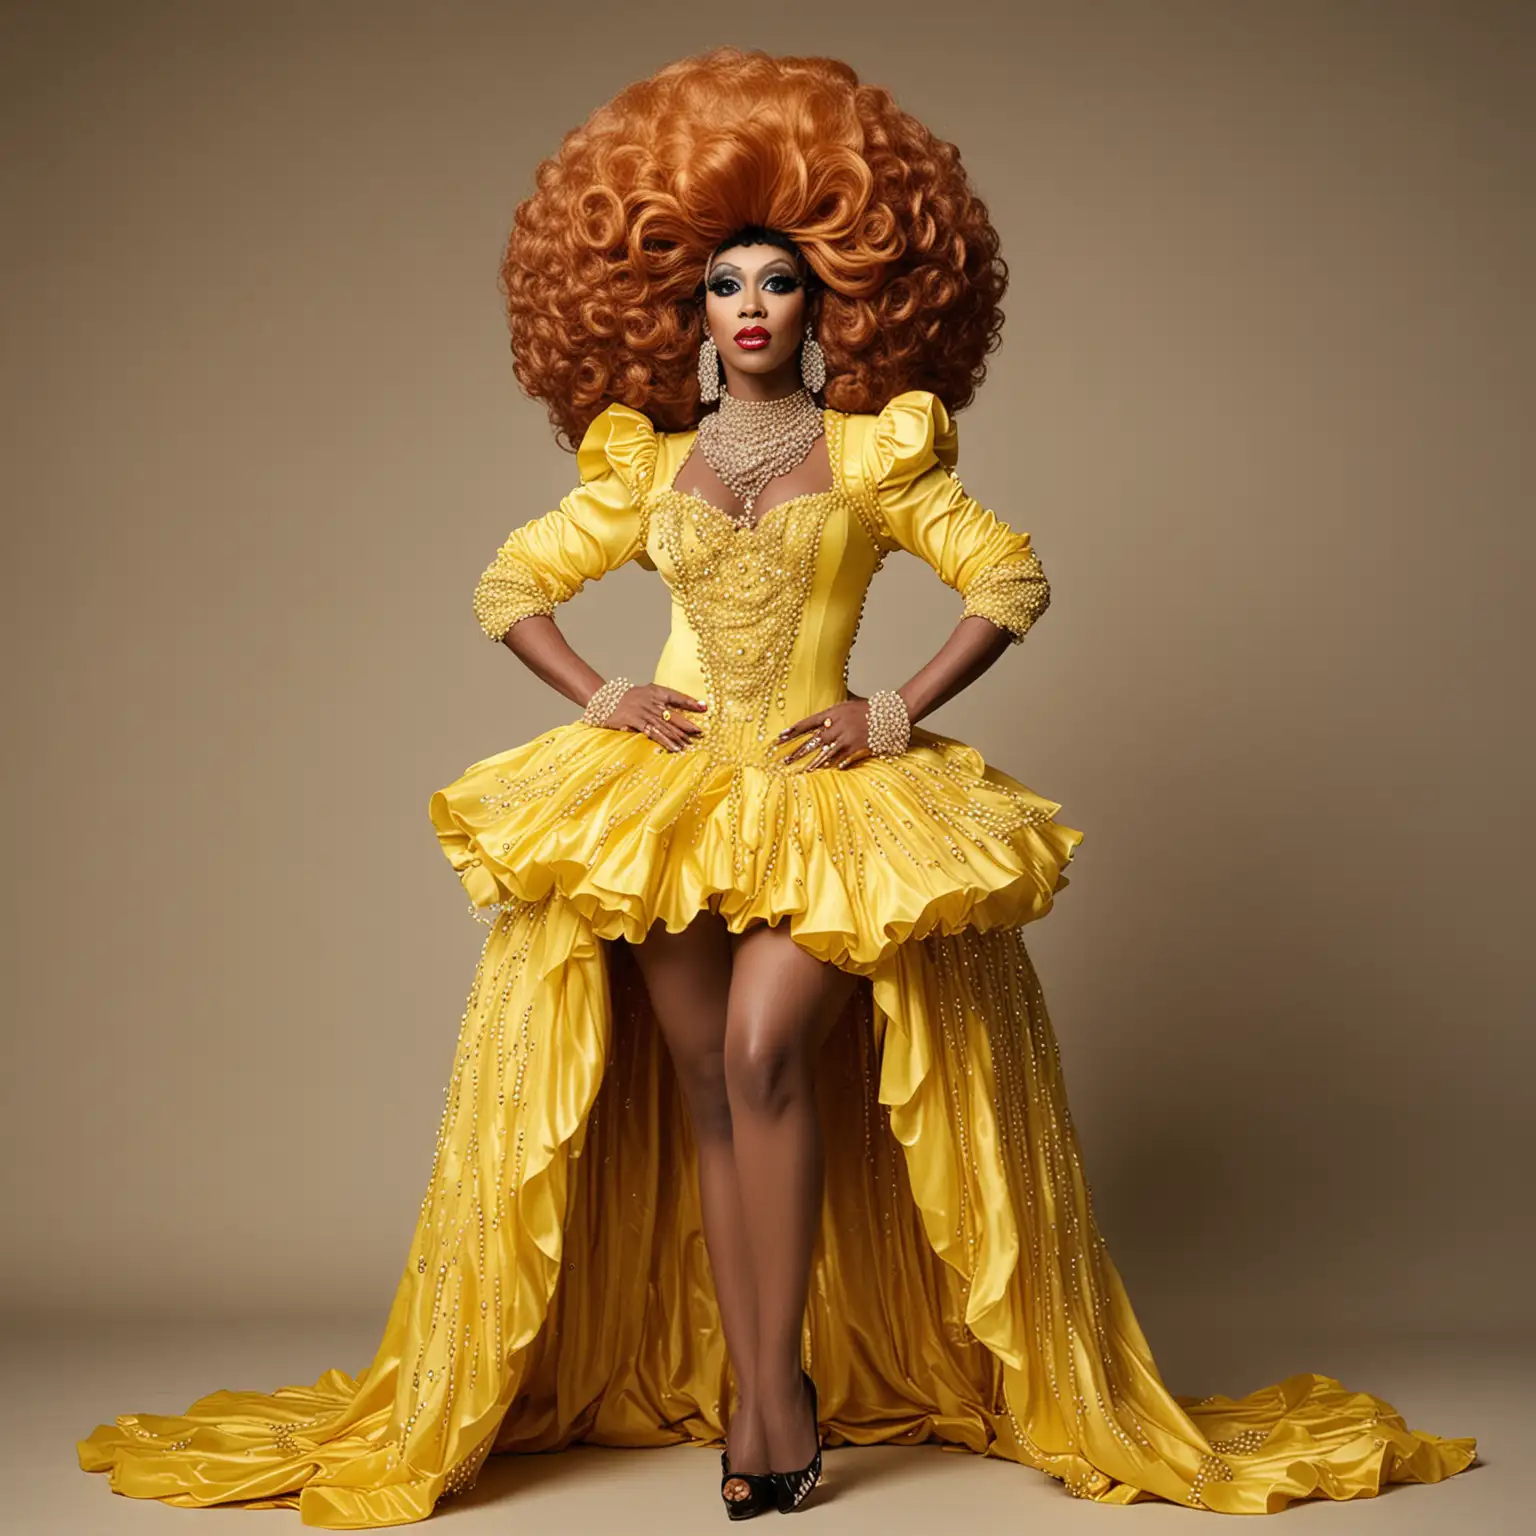 Elegant Black Drag Queen in Yellow Dress and Pearls